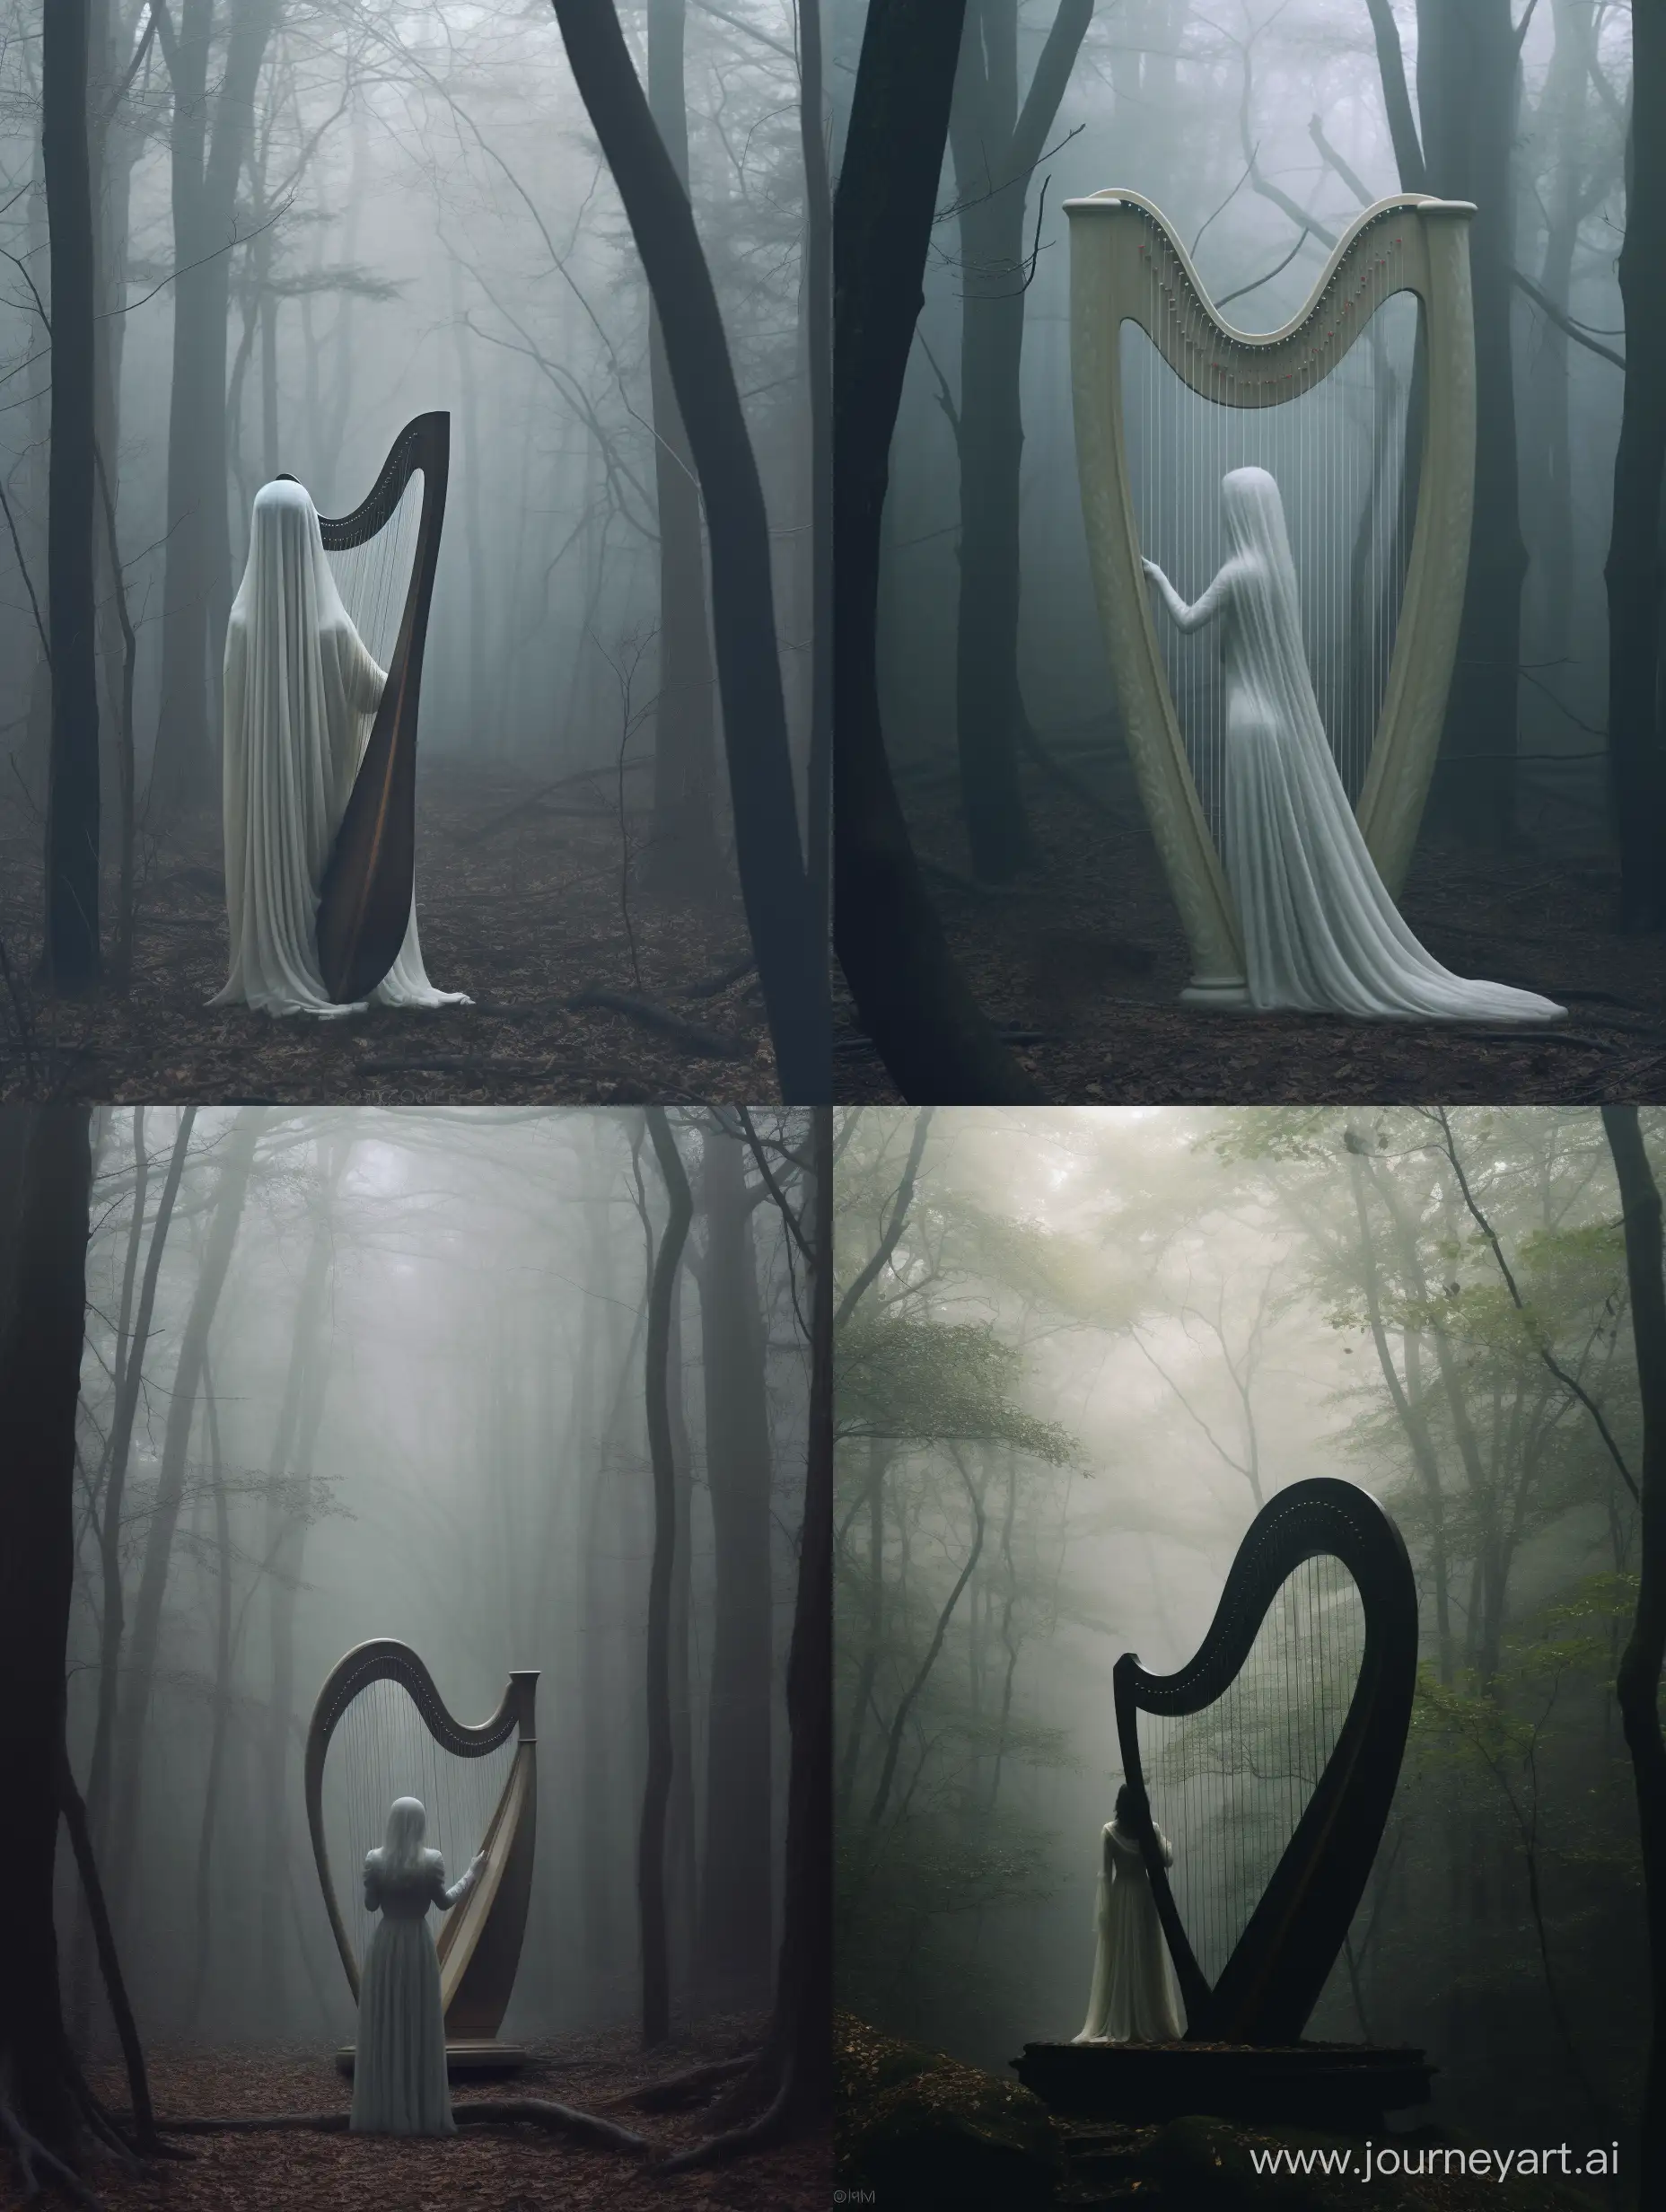 Ethereal-Harpist-Creating-Mesmerizing-Melodies-in-Minimalistic-Forest